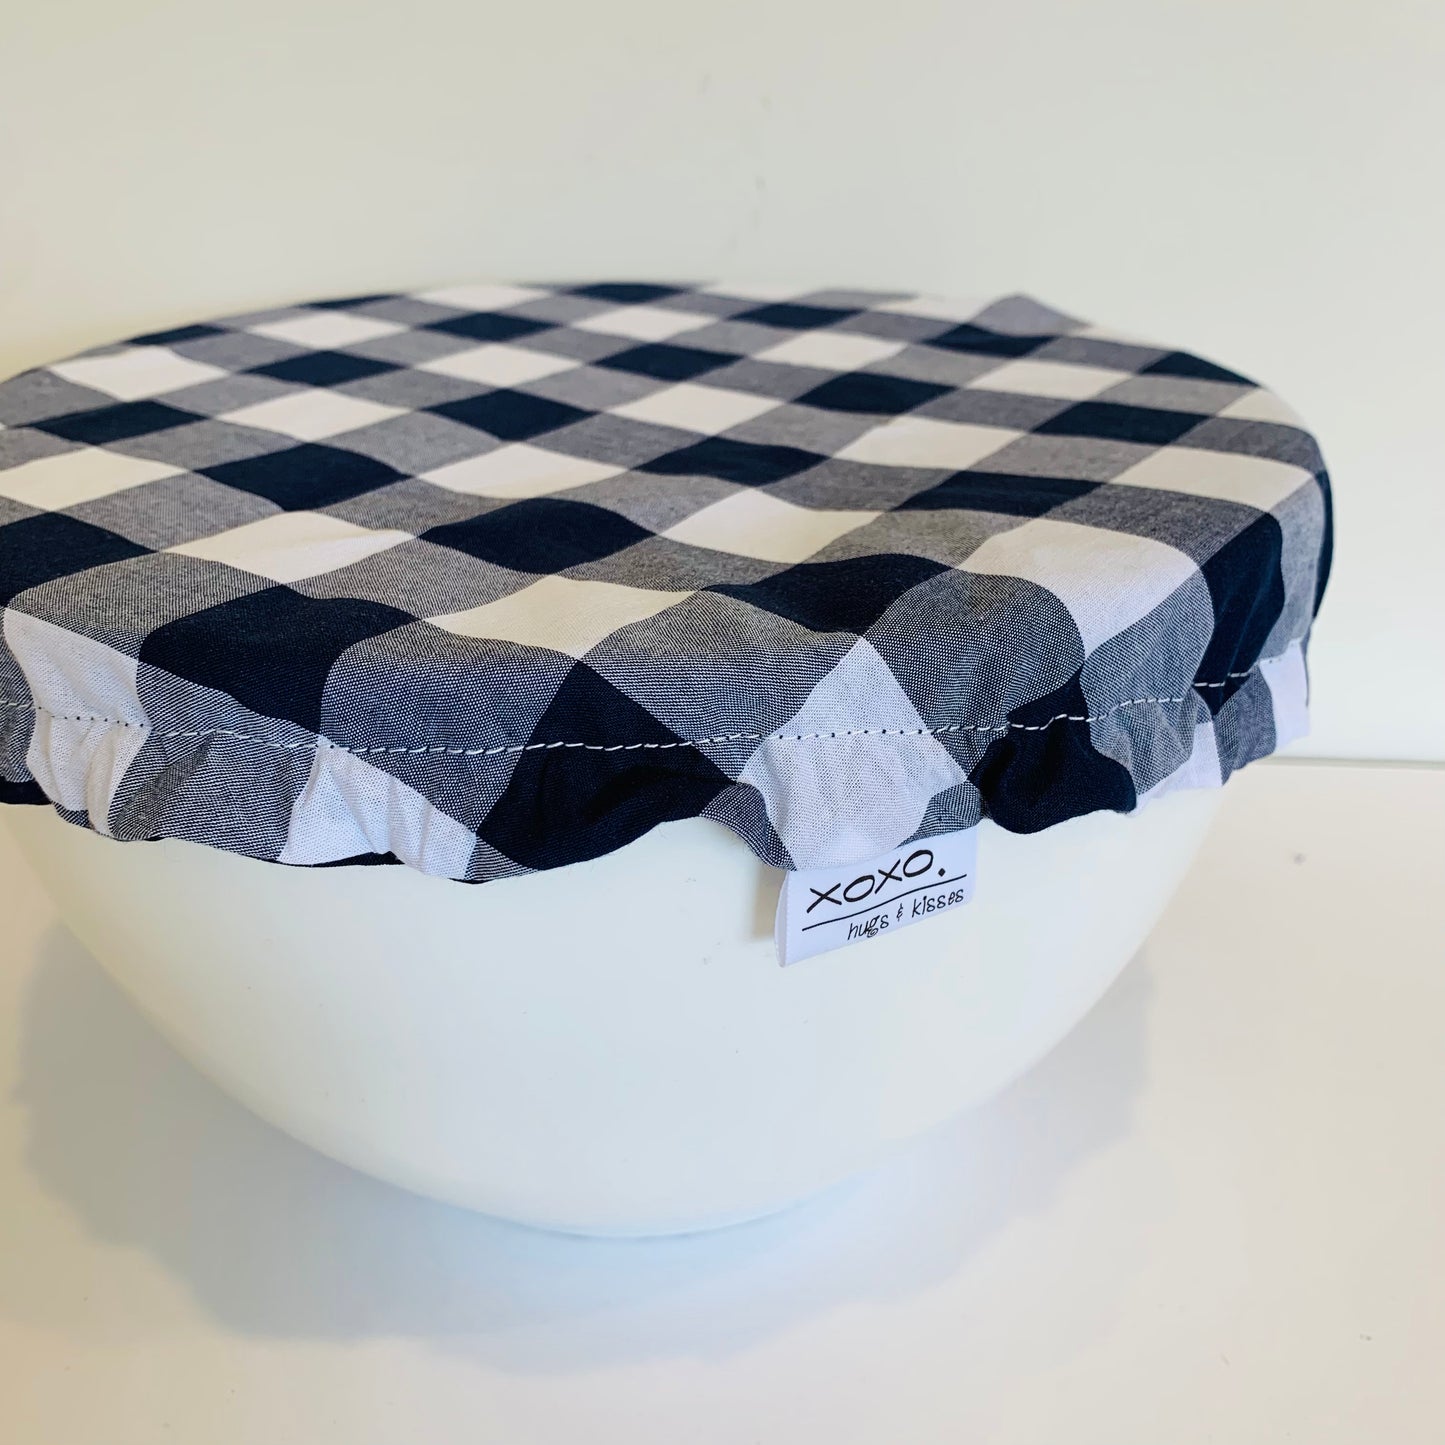 Fabric Bowl Covers - XL